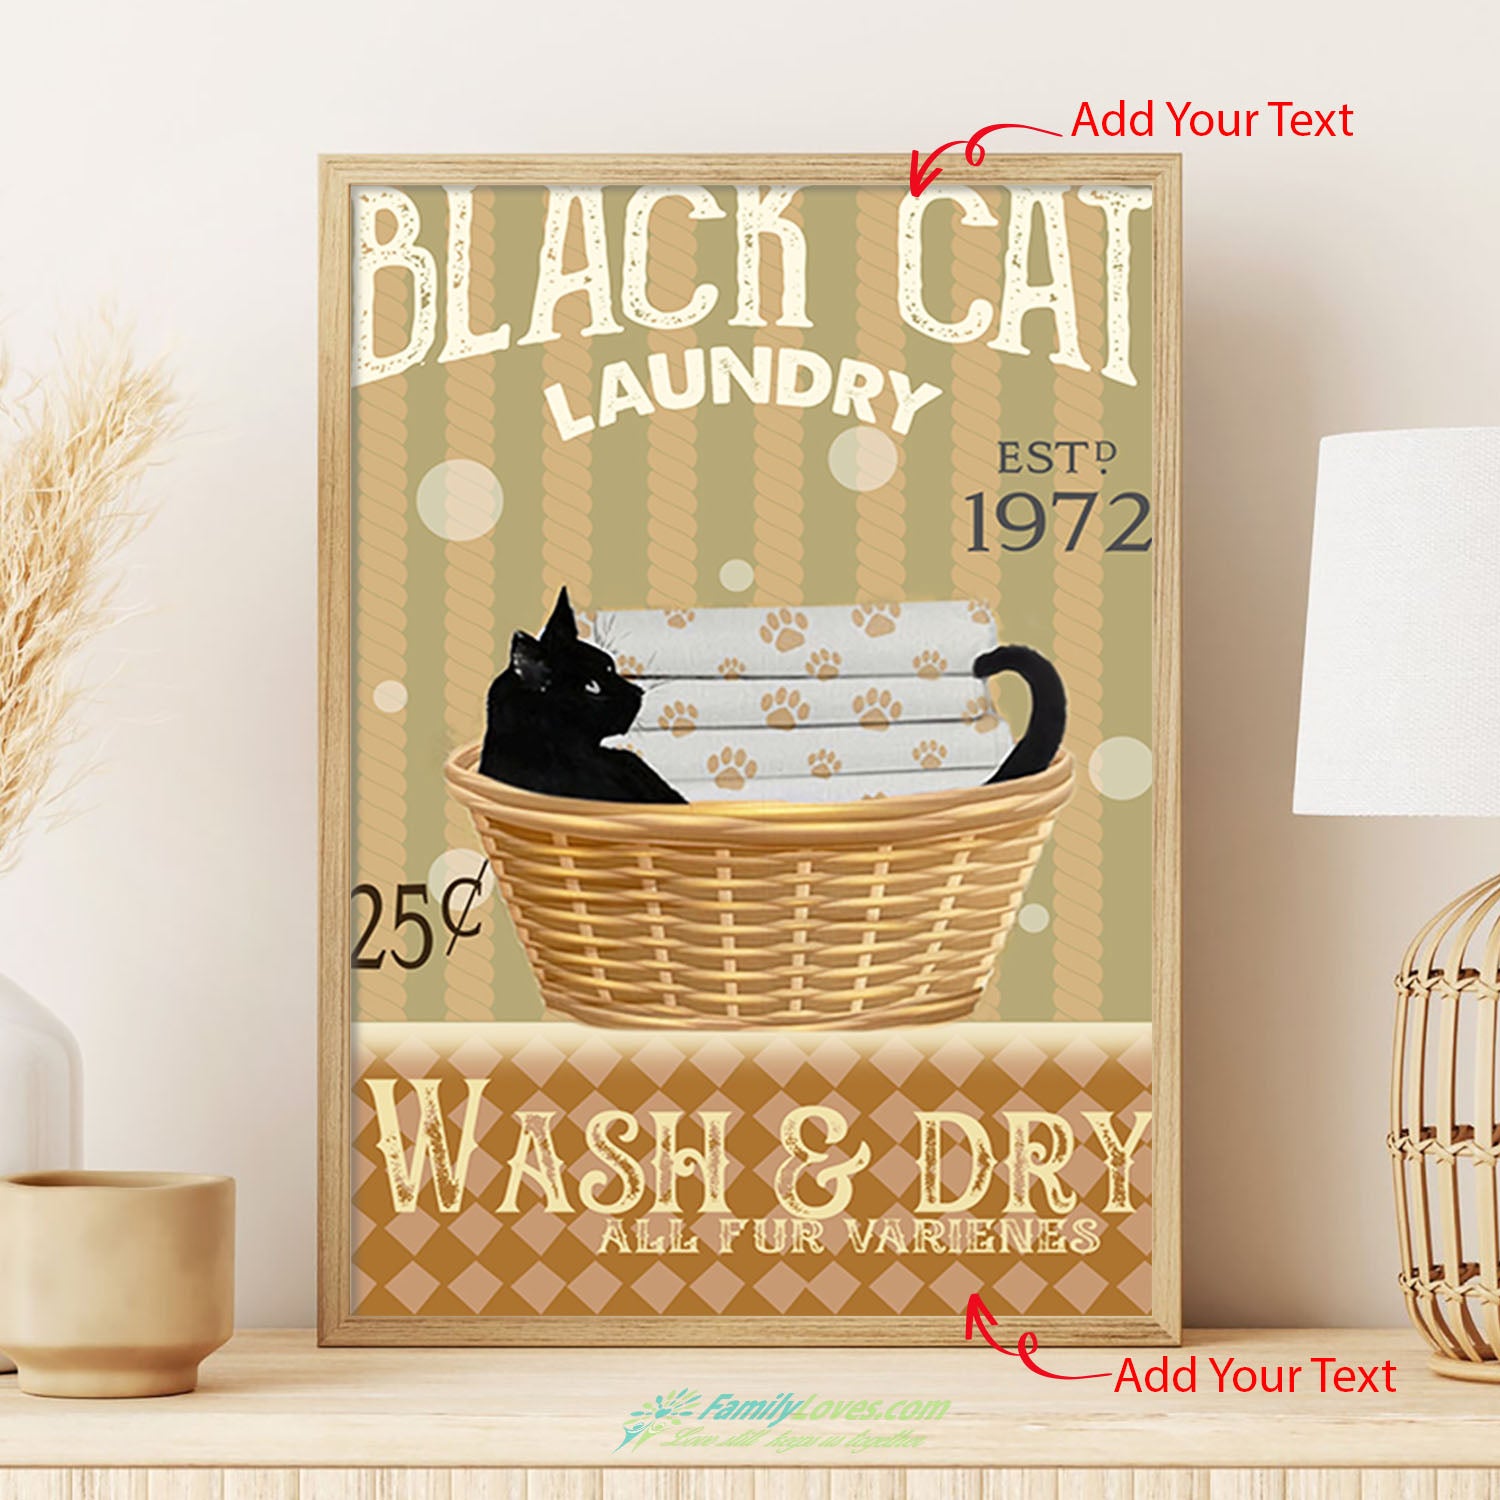 Black Cat Laundry Wash Canvas Wall Decor Poster 12X16 All Size 1